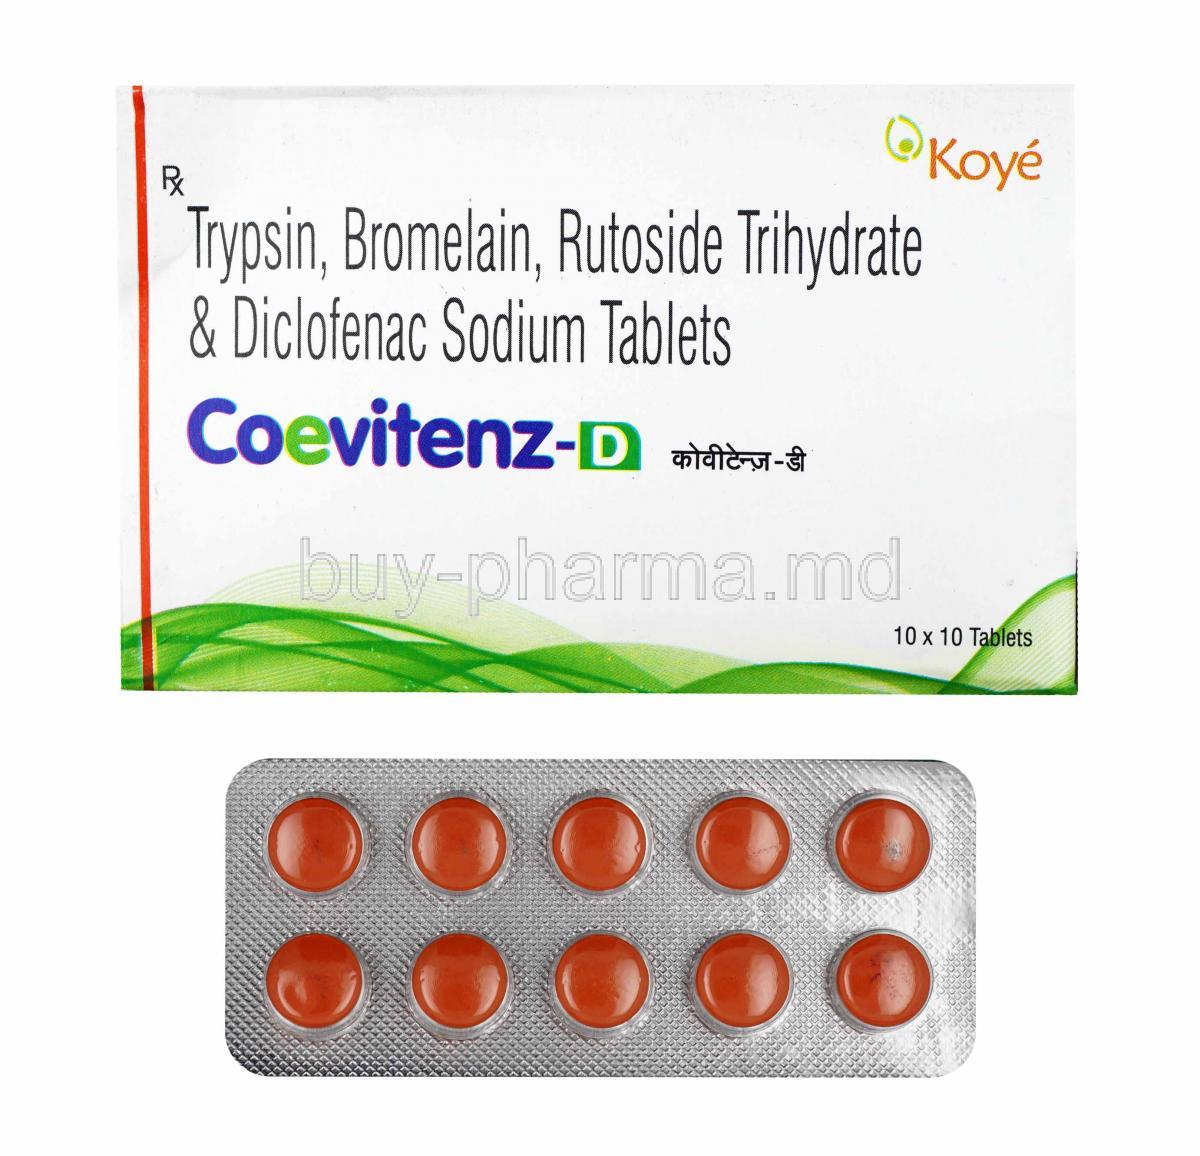 Coevitenz-D, Trypsin, Bromelain, Rutoside and Diclofenac box and tablets